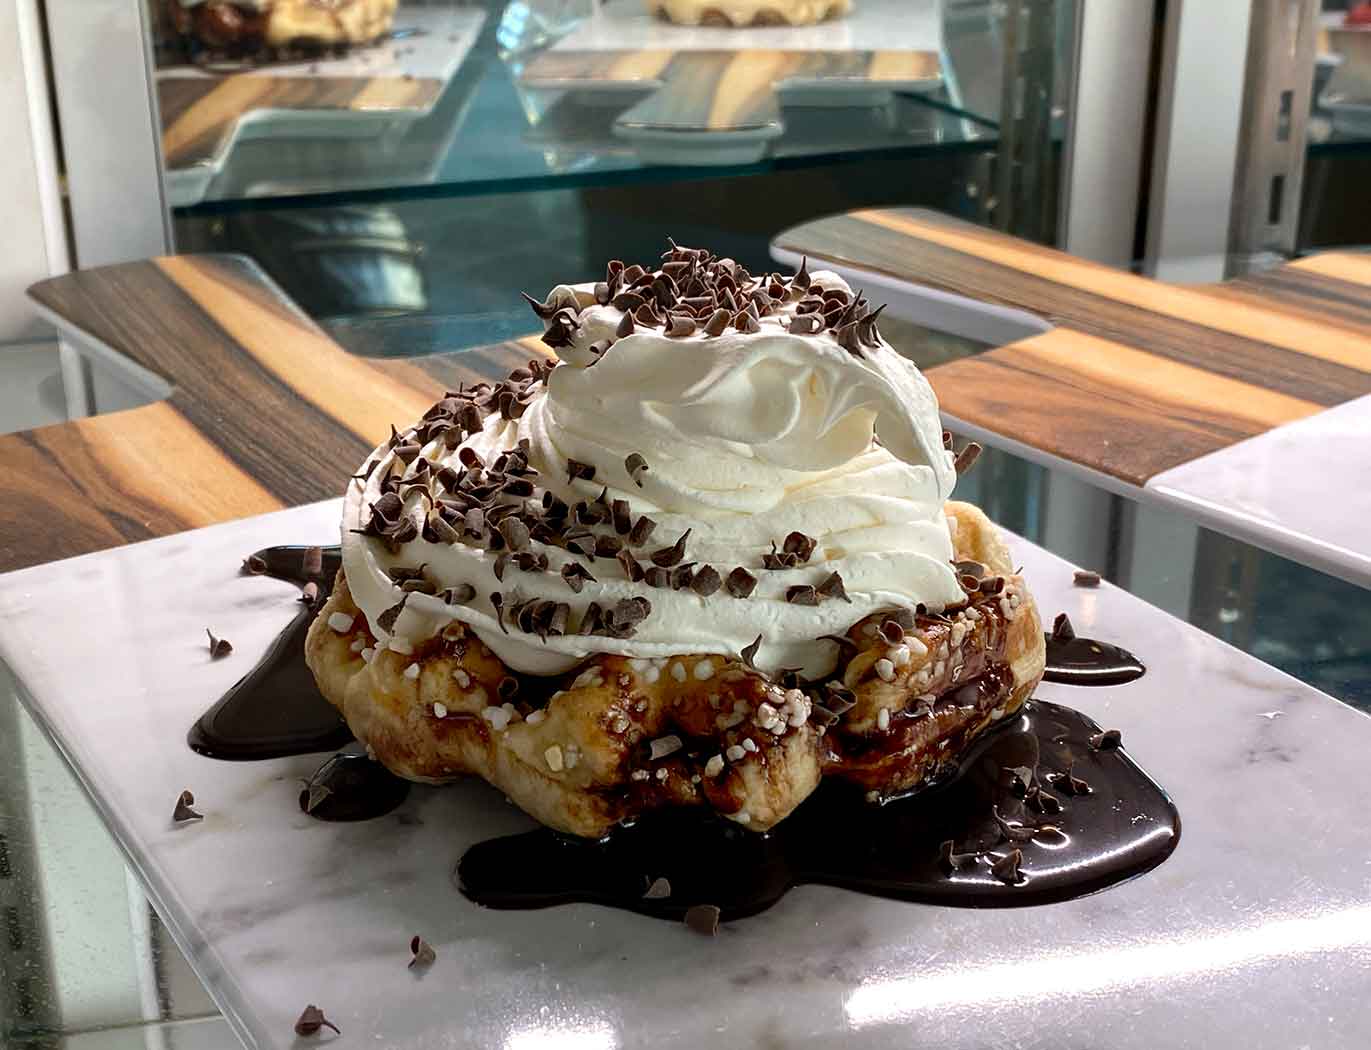 Marty’s Waffle with Dutch chocolate and whipped cream, plus a sprinkle of chocolate chips on top